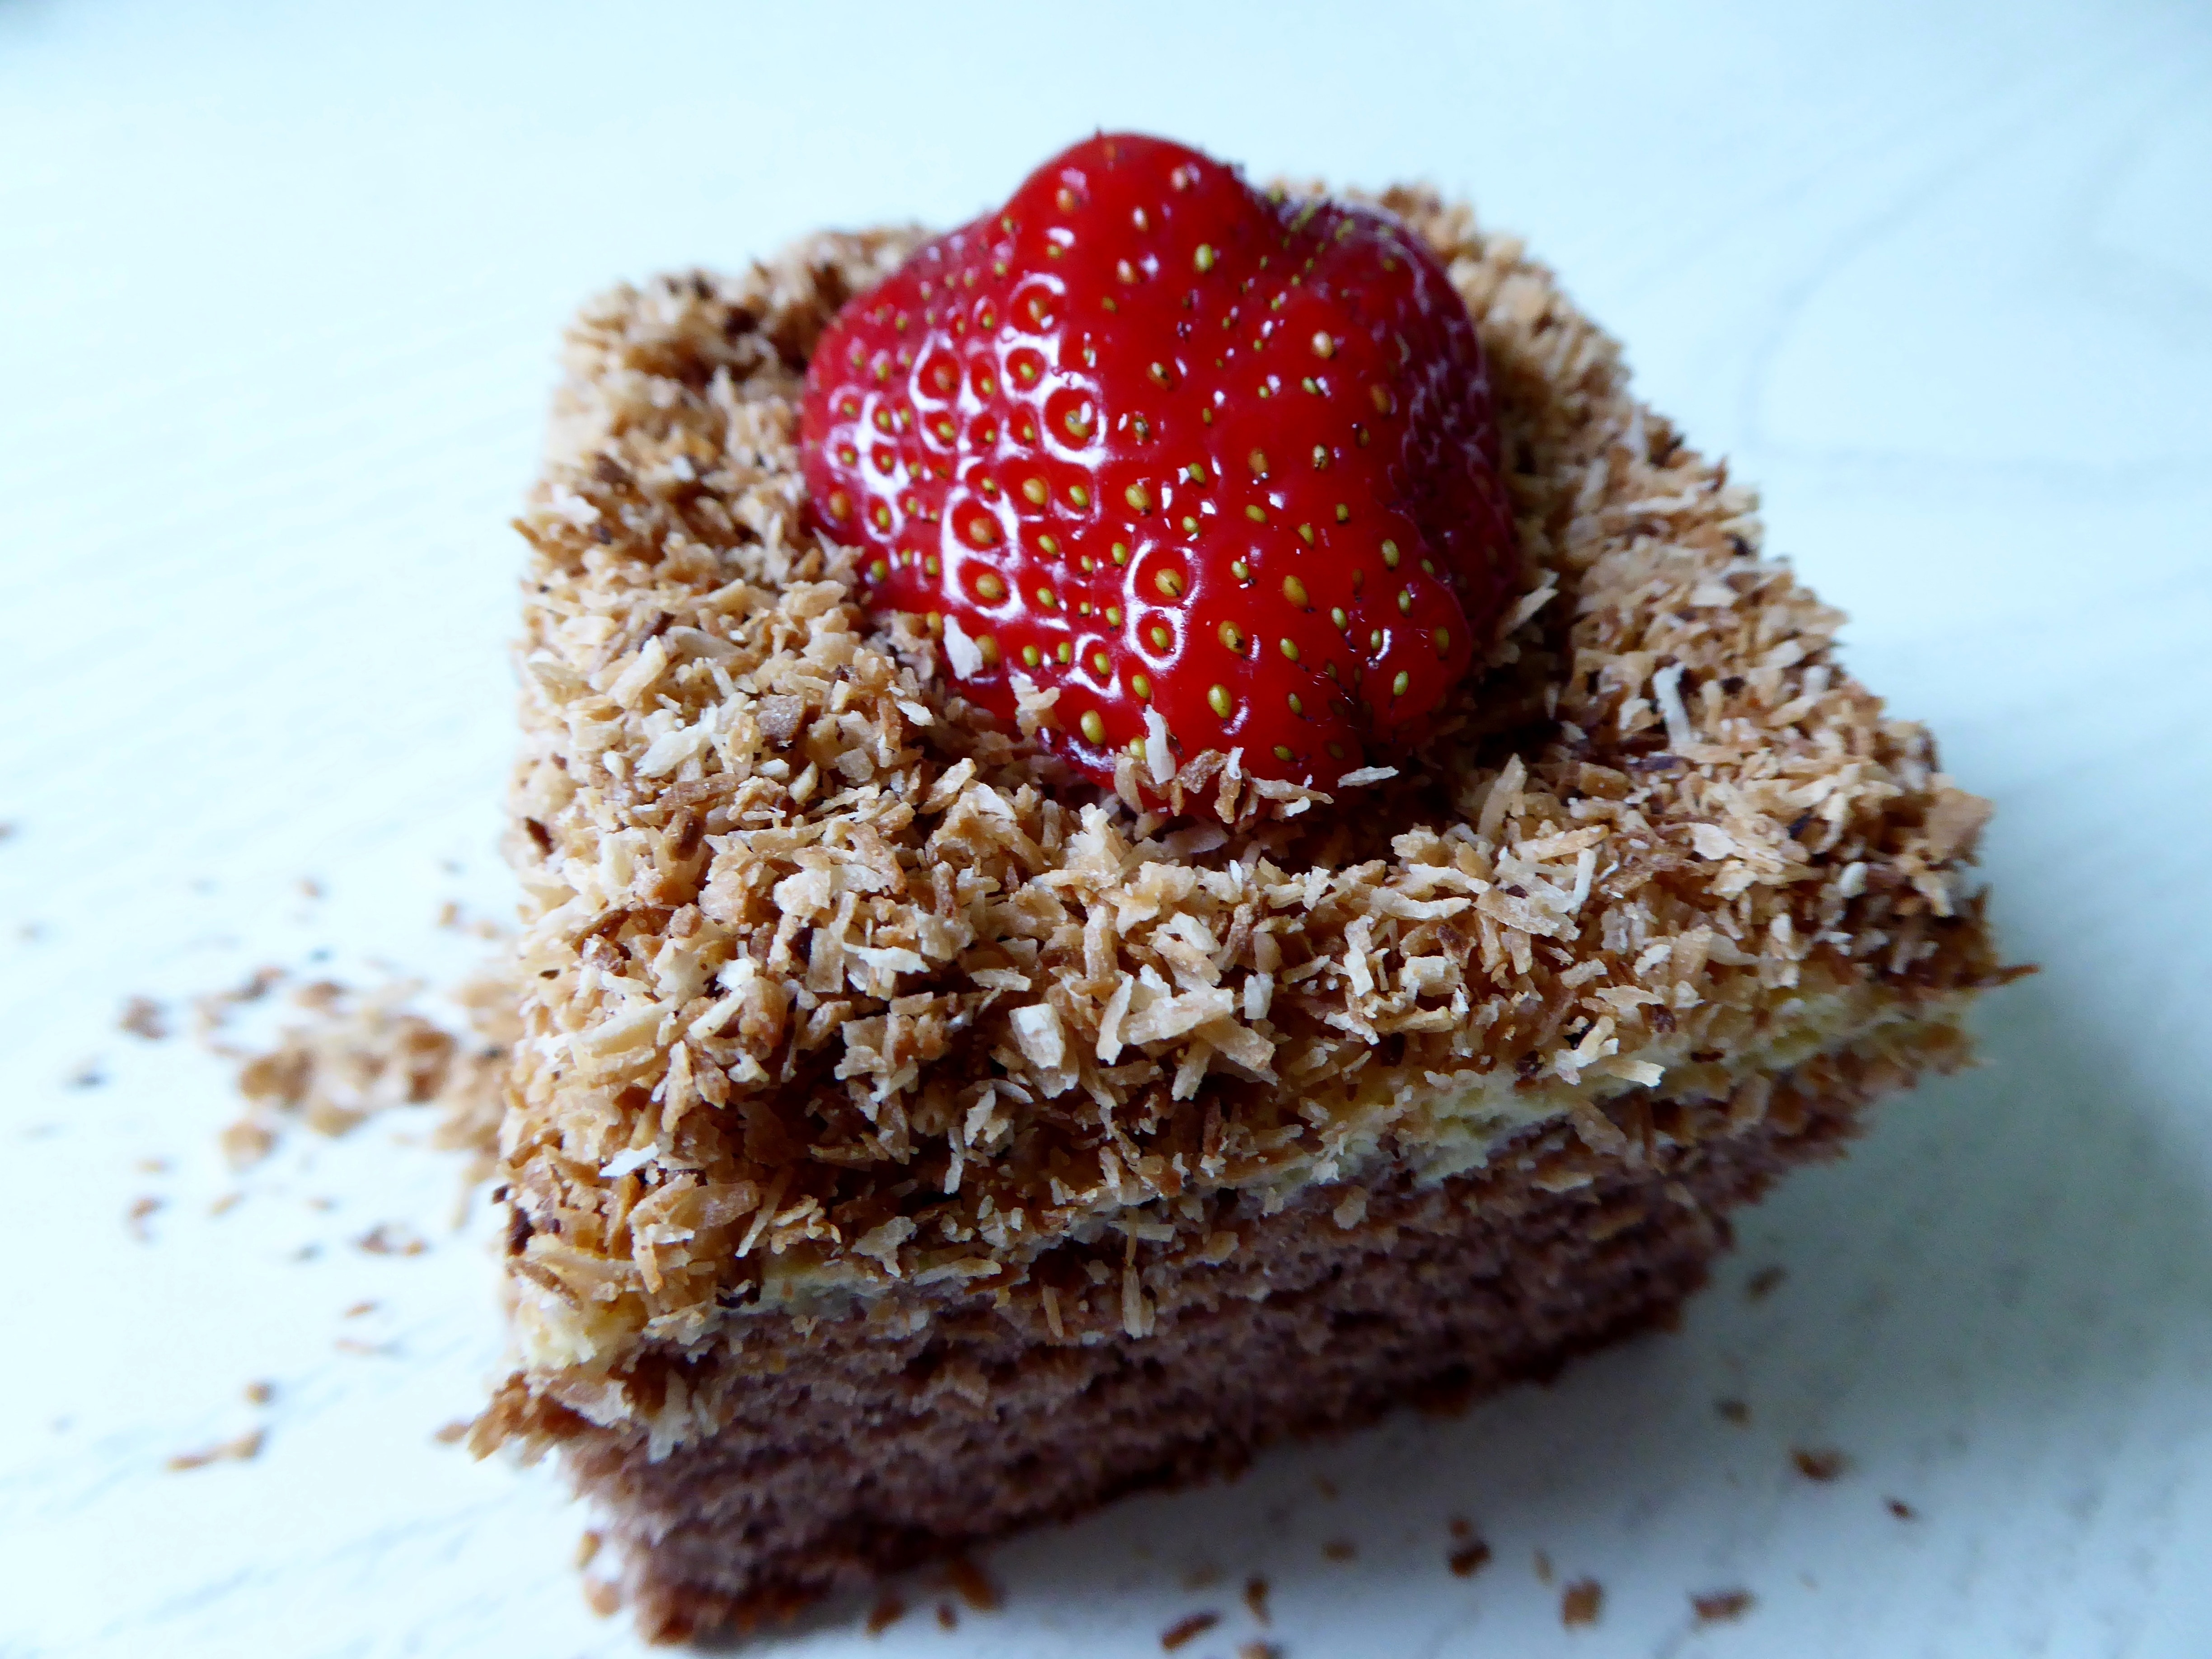 brown sliced cake with strawberry on top